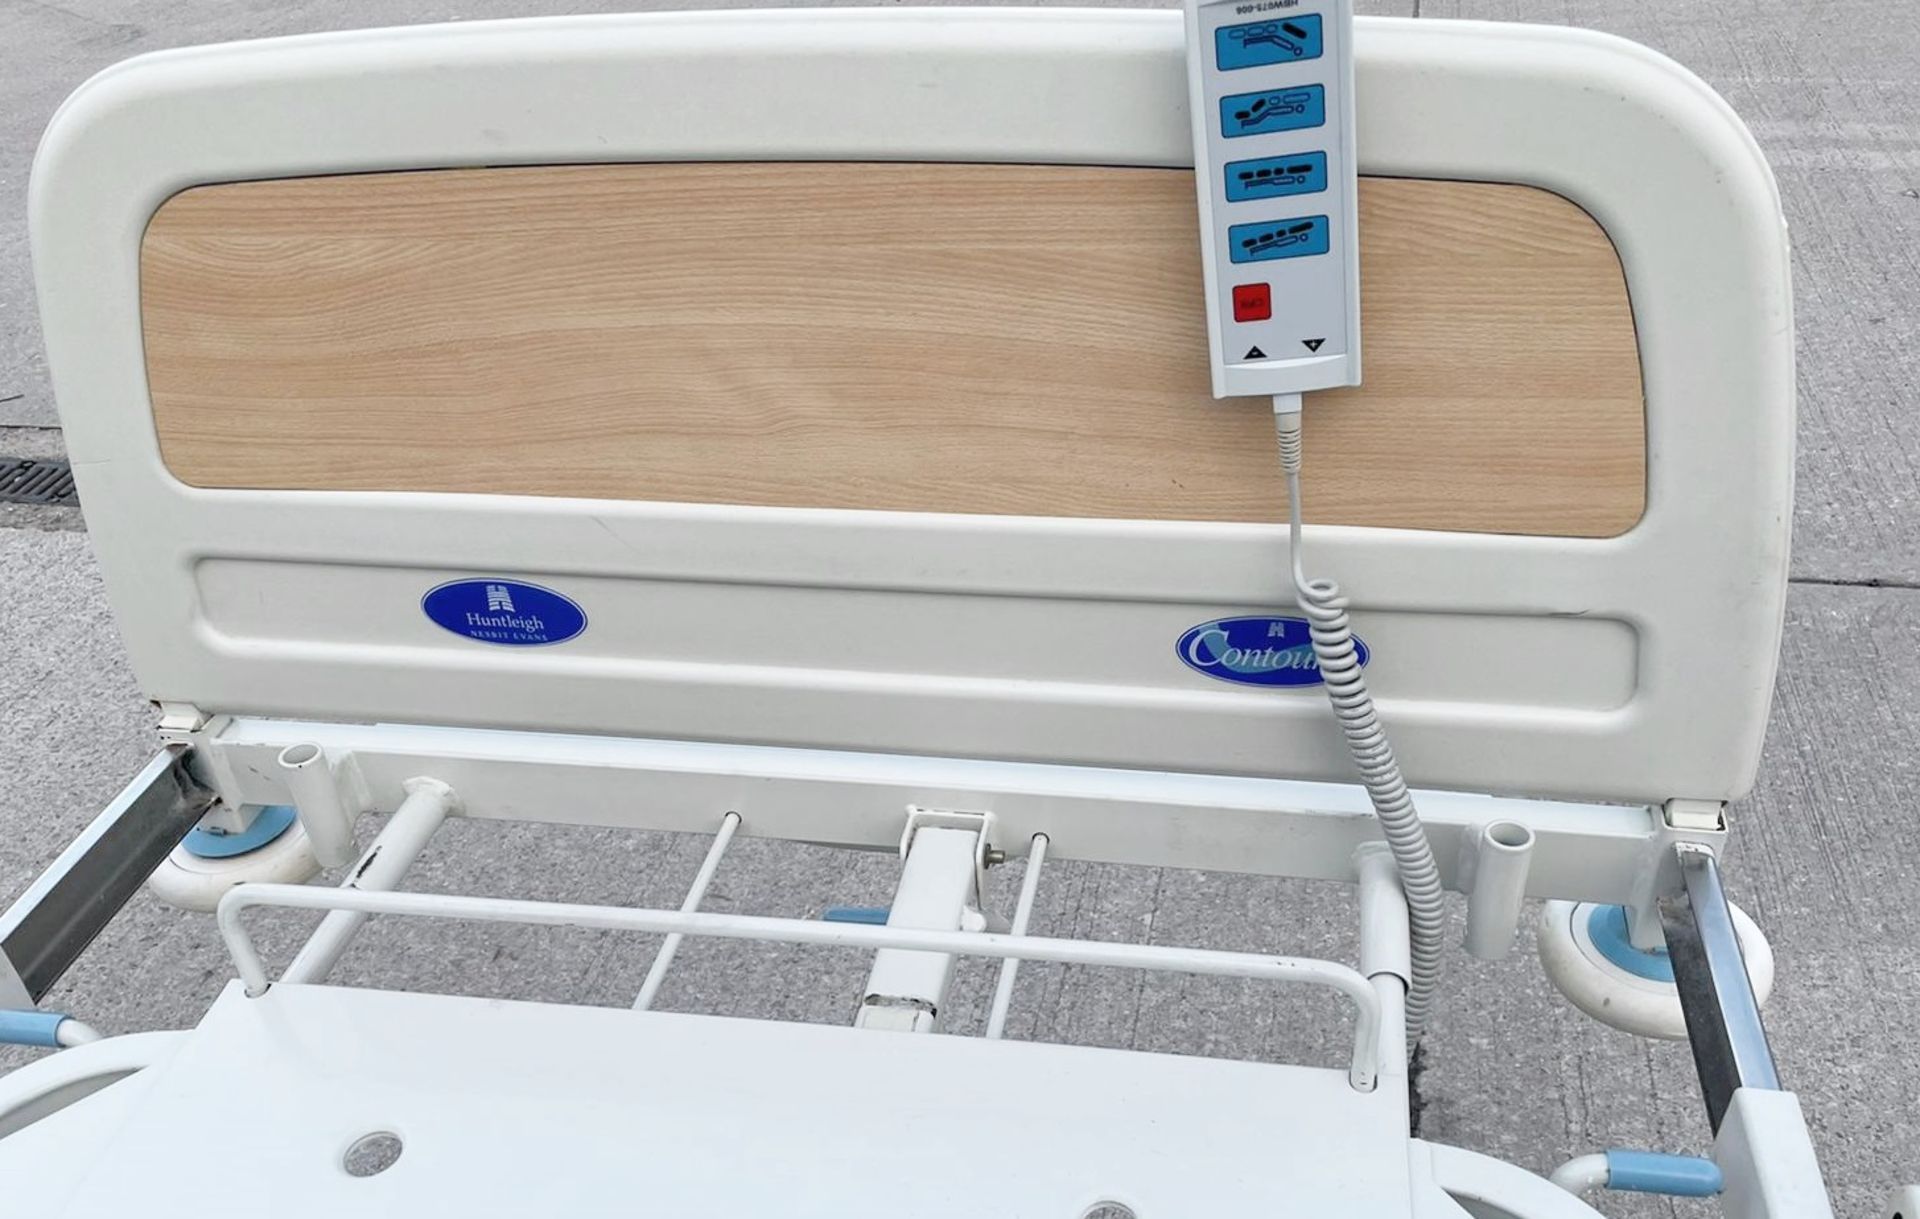 1 x Huntleigh CONTOURA Electric Hospital Bed - Features Rise/Fall 3-Way Profiling, Side Rails, - Image 7 of 11